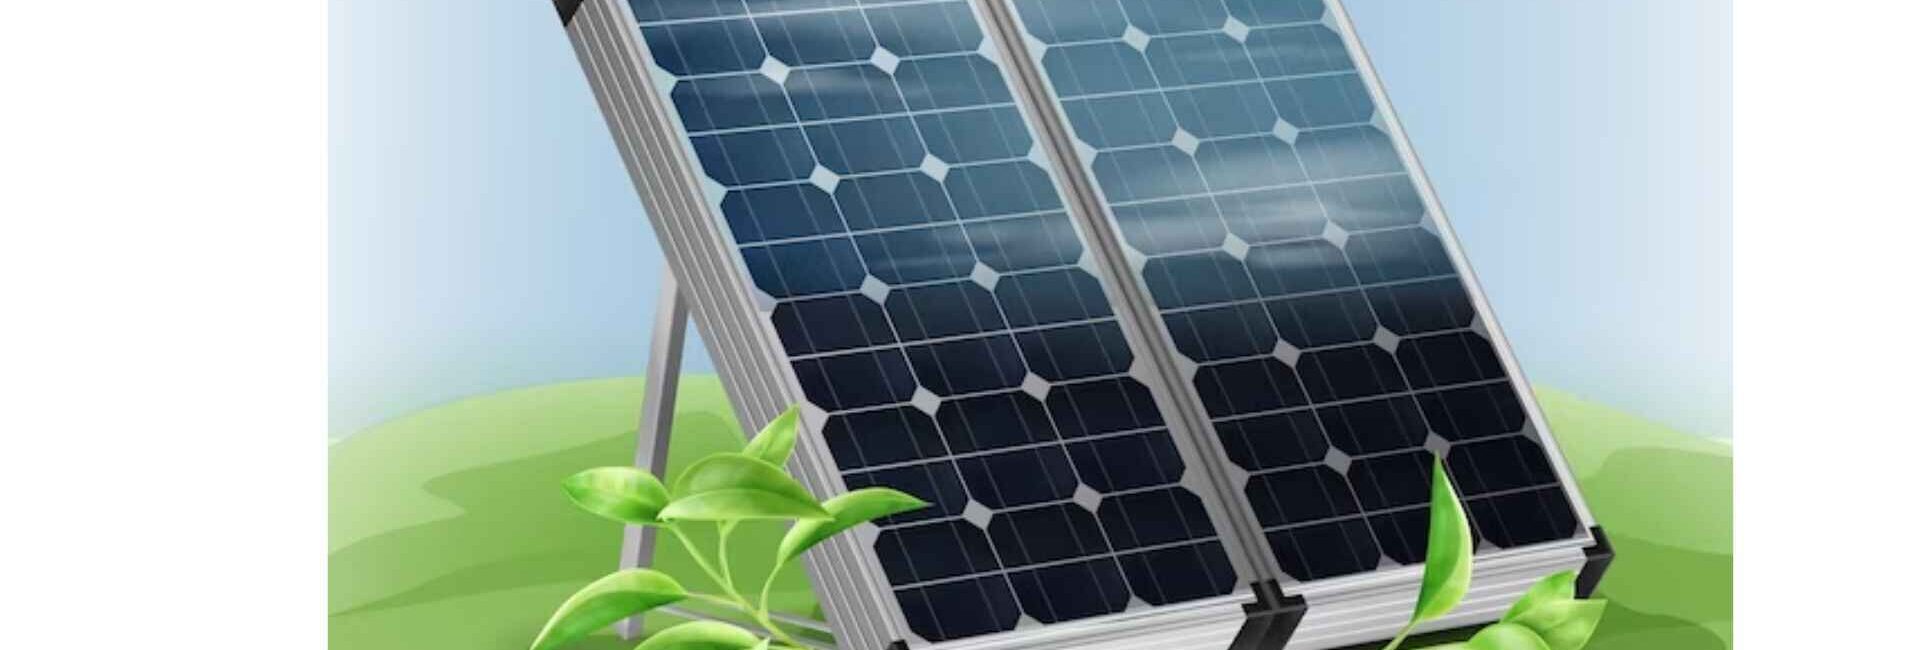 SPM Energy Private Limited - Solar power system in Noida